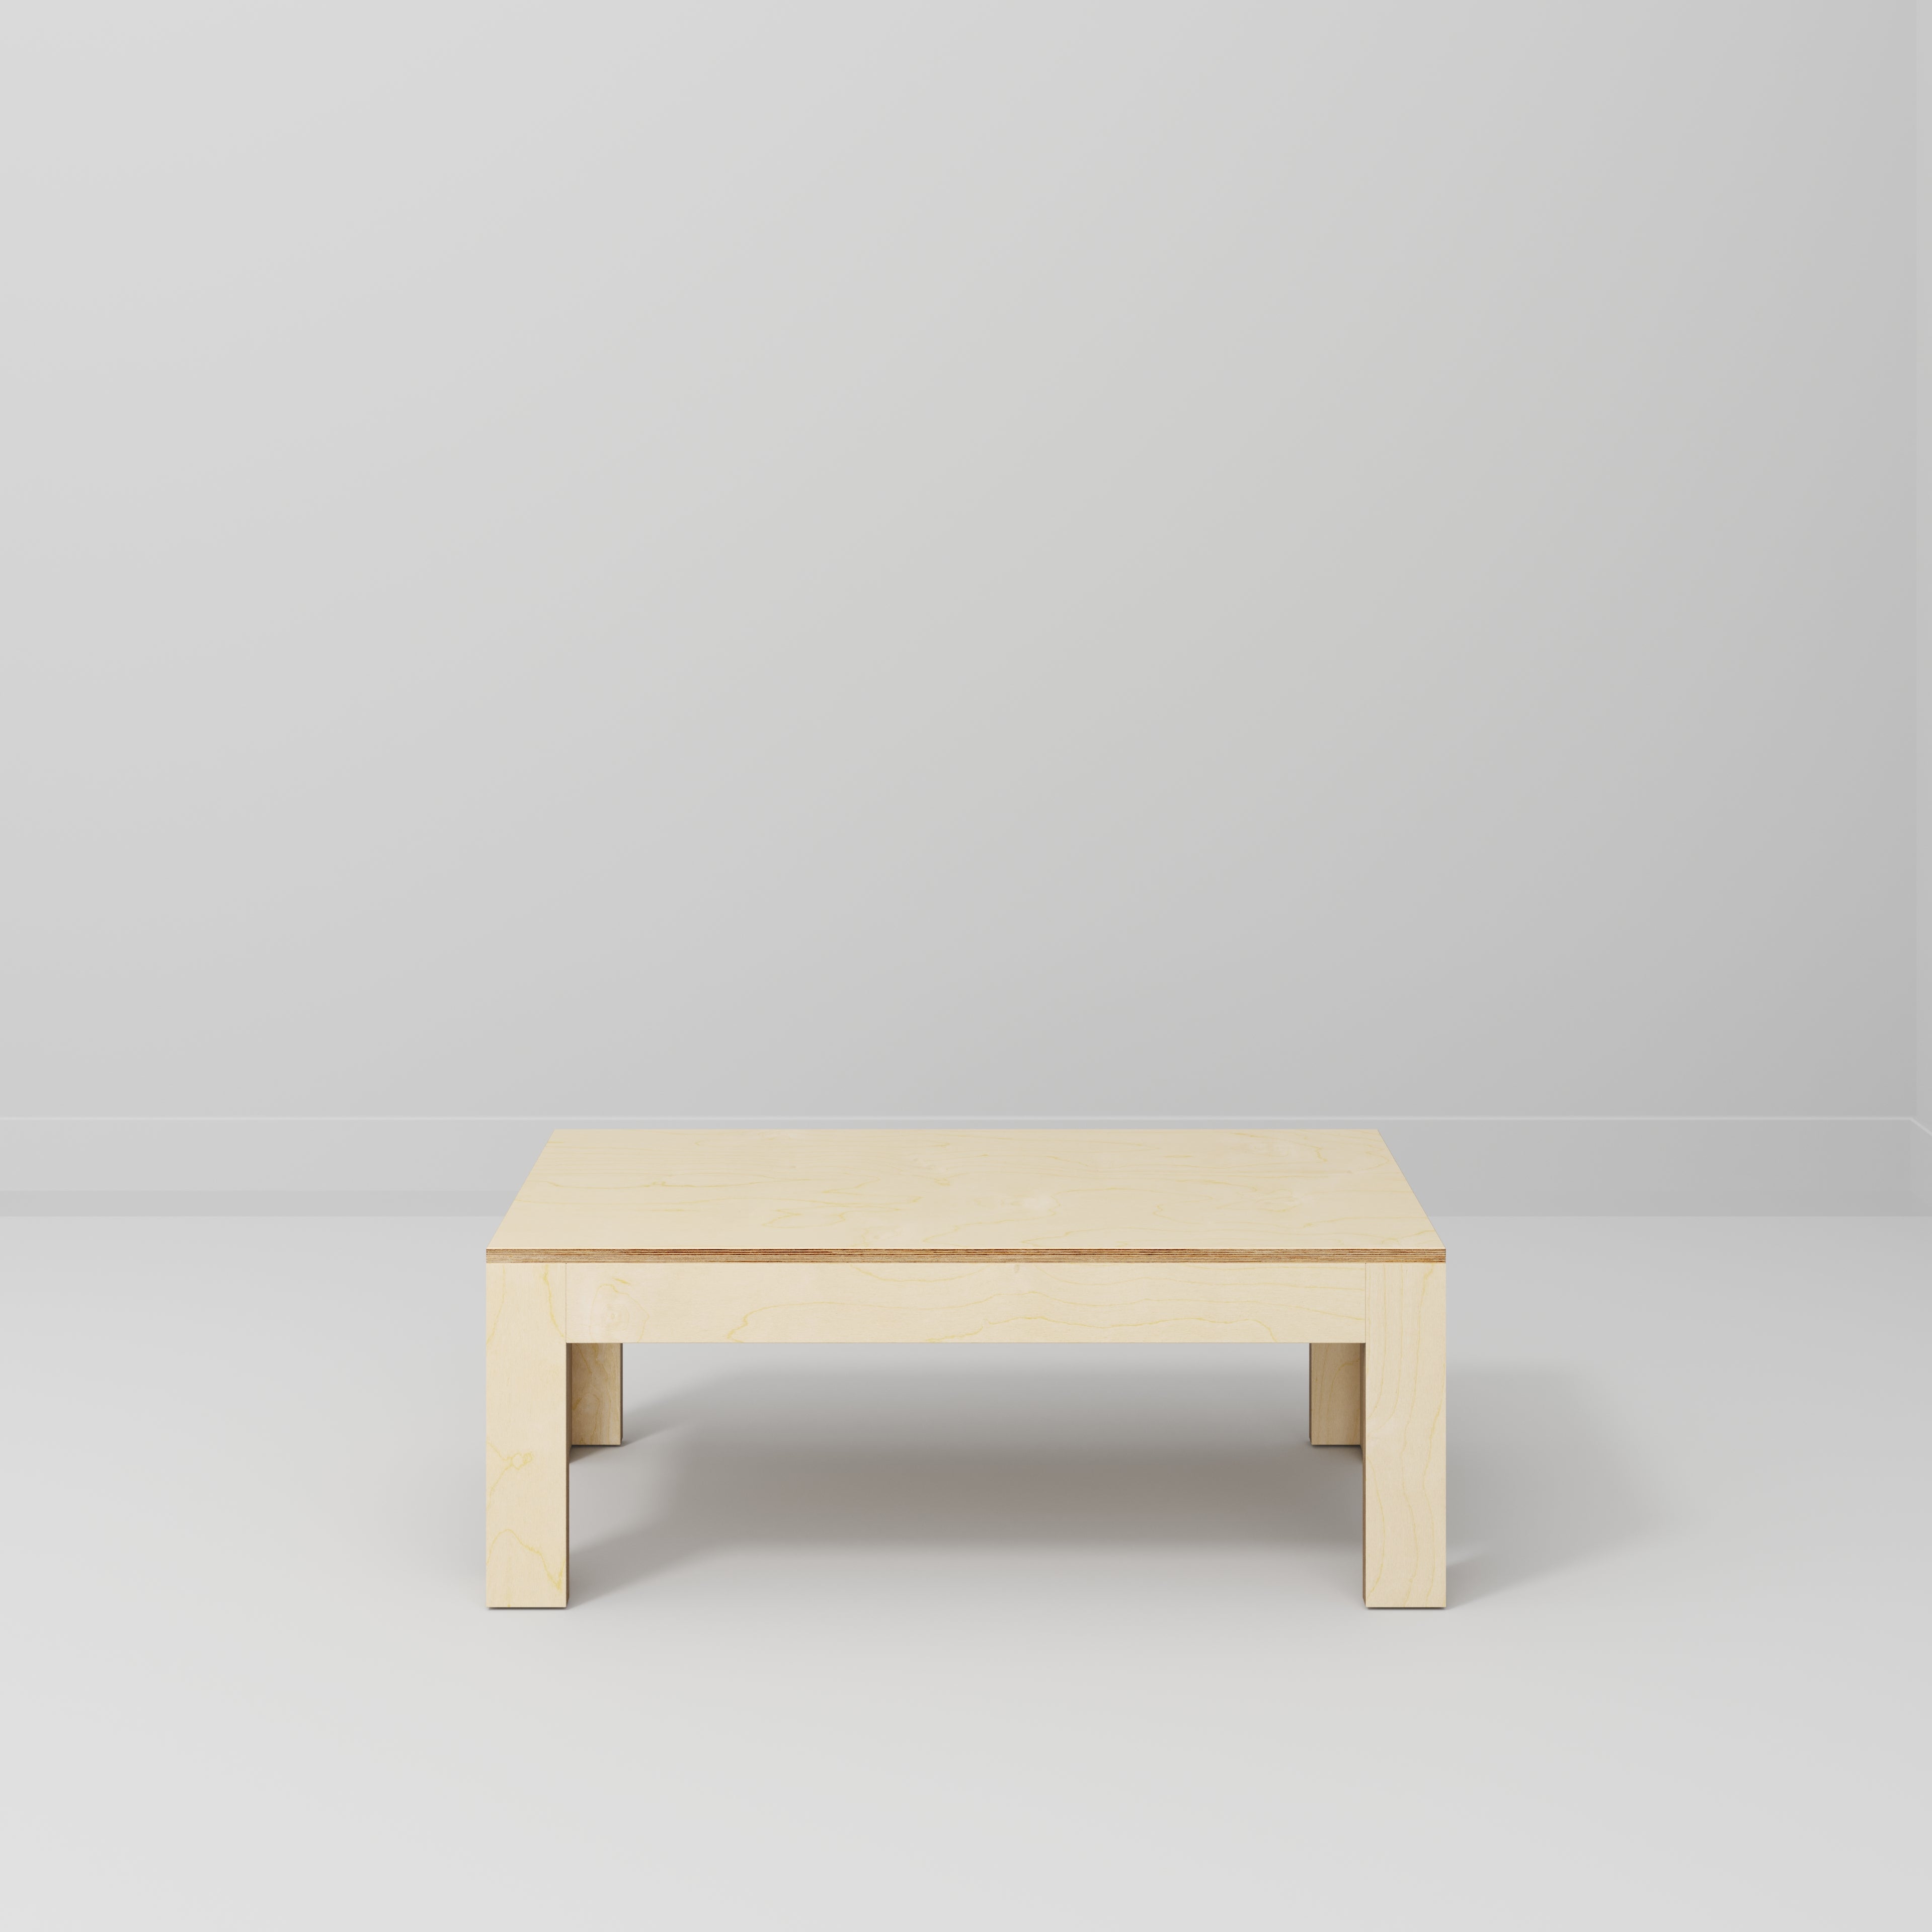 Coffee Table with Solid Frame - Plywood Birch - 1200(w) x 600(d) x 450(h)